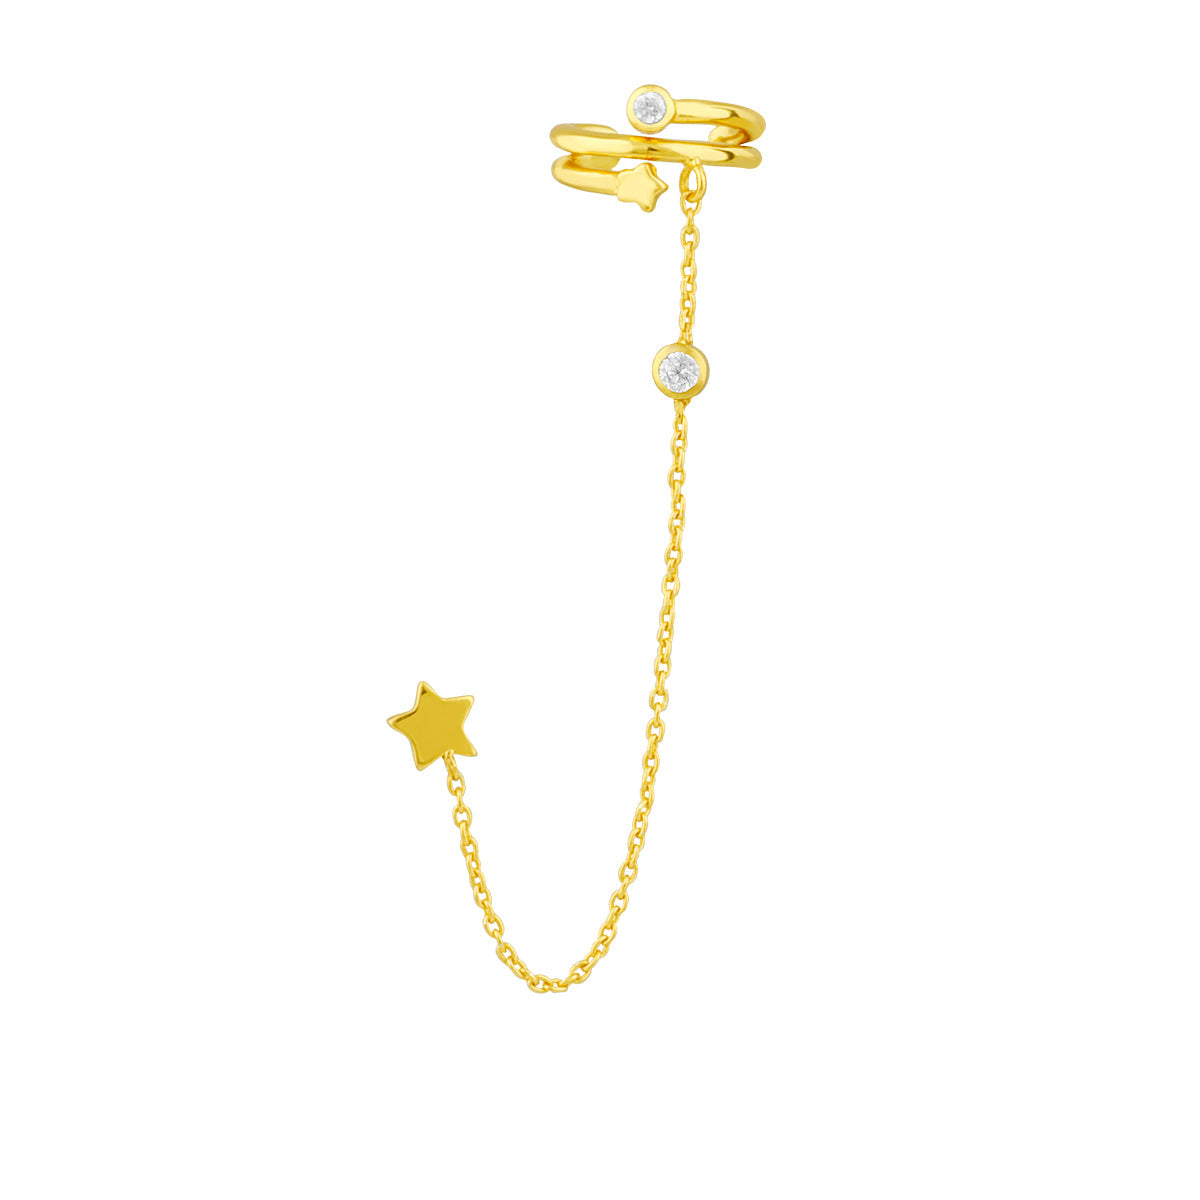 Gold Plated Sterling Silver Shooting Star Ear Cuff Chain Stud Earring